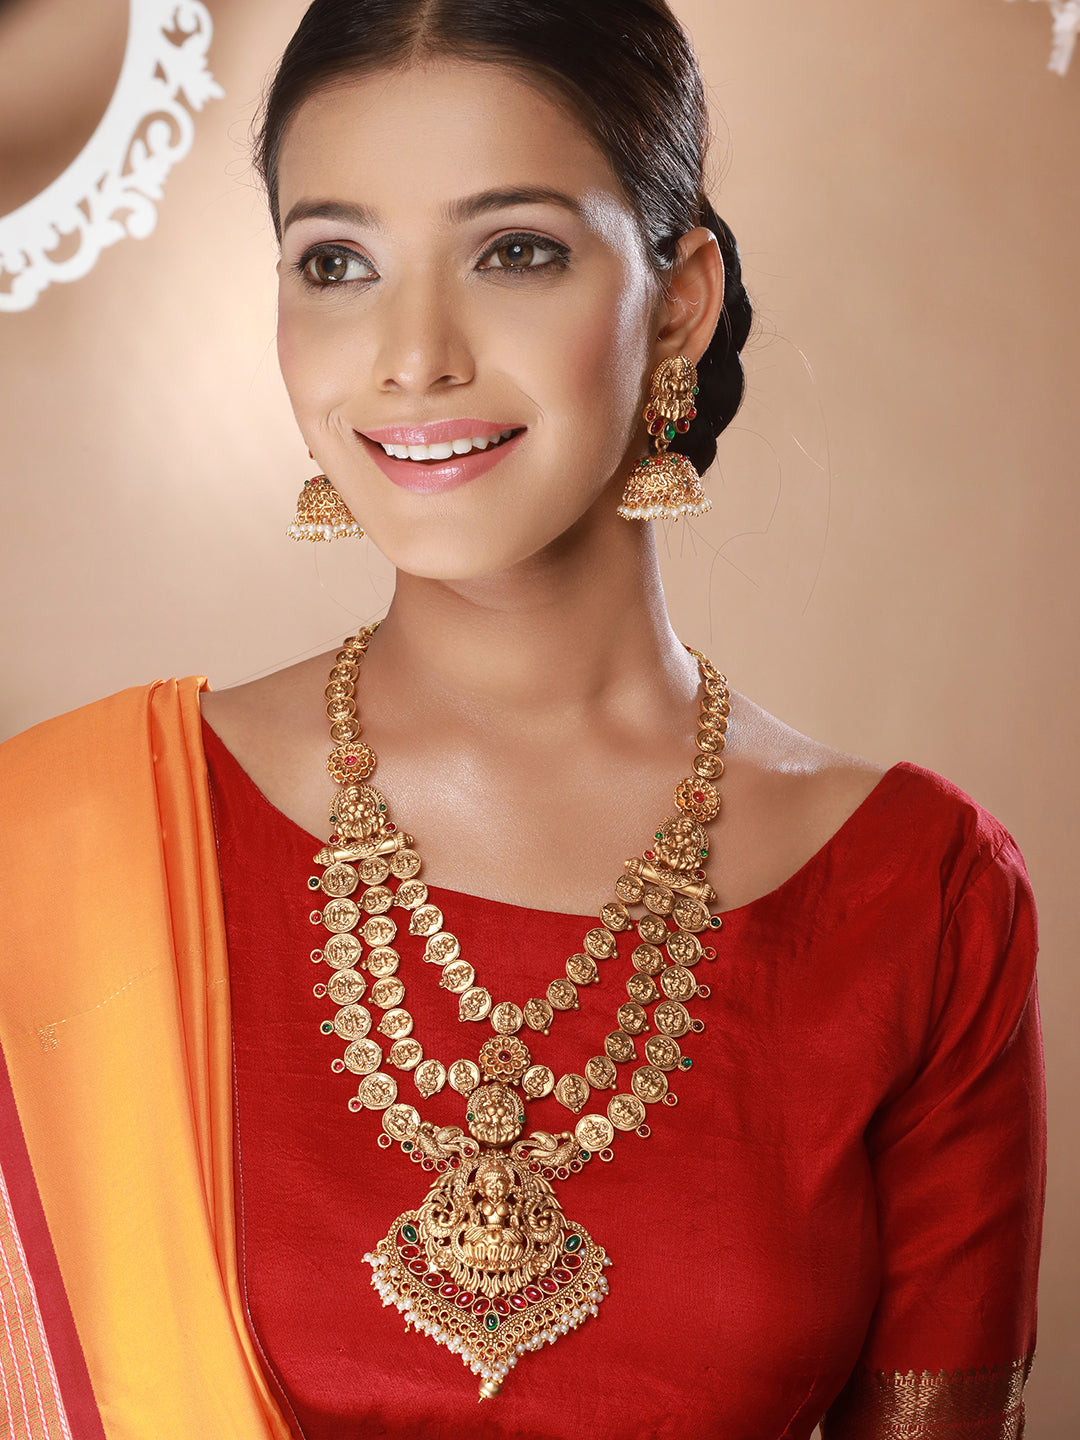 22K Gold-Plated Stone-Studded & Beaded Temple Lakshmiji Coin Bridal  Jewellery Set